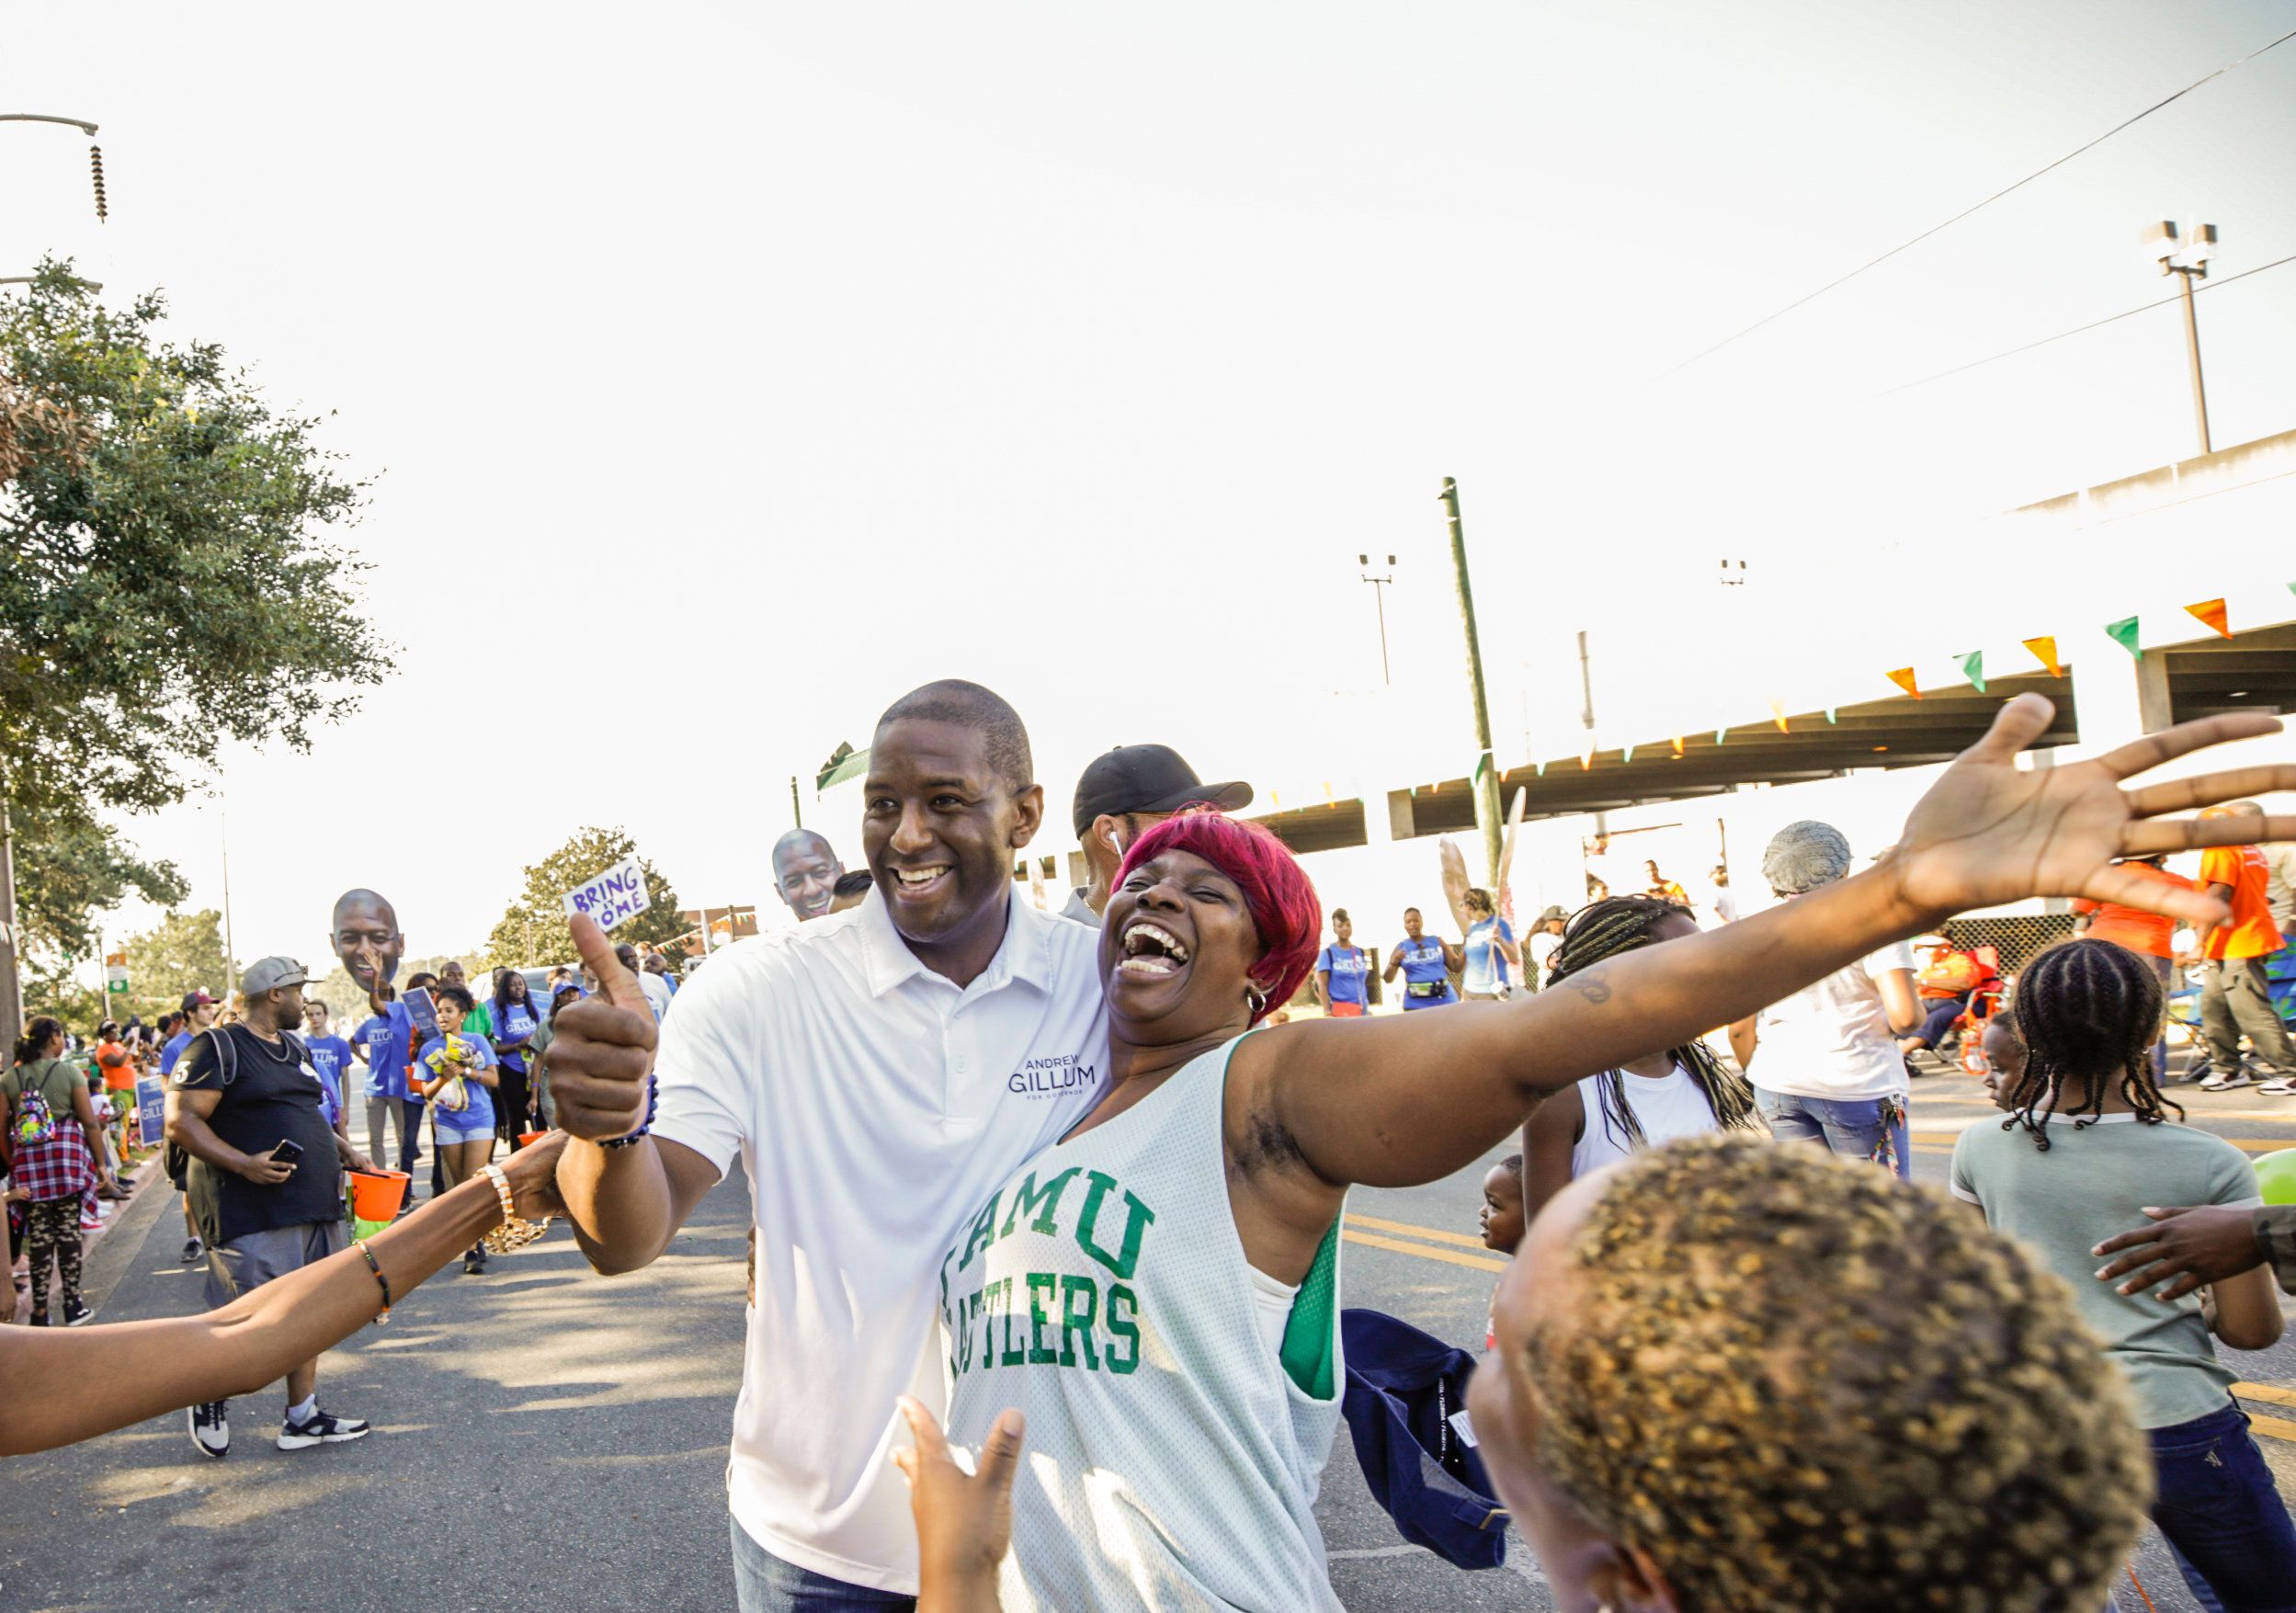 &ldquo;It was energizing, and I&rsquo;m honored that somebody wants to take a picture,&rdquo; Gillum said. &ldquo;It&rsquo;s 